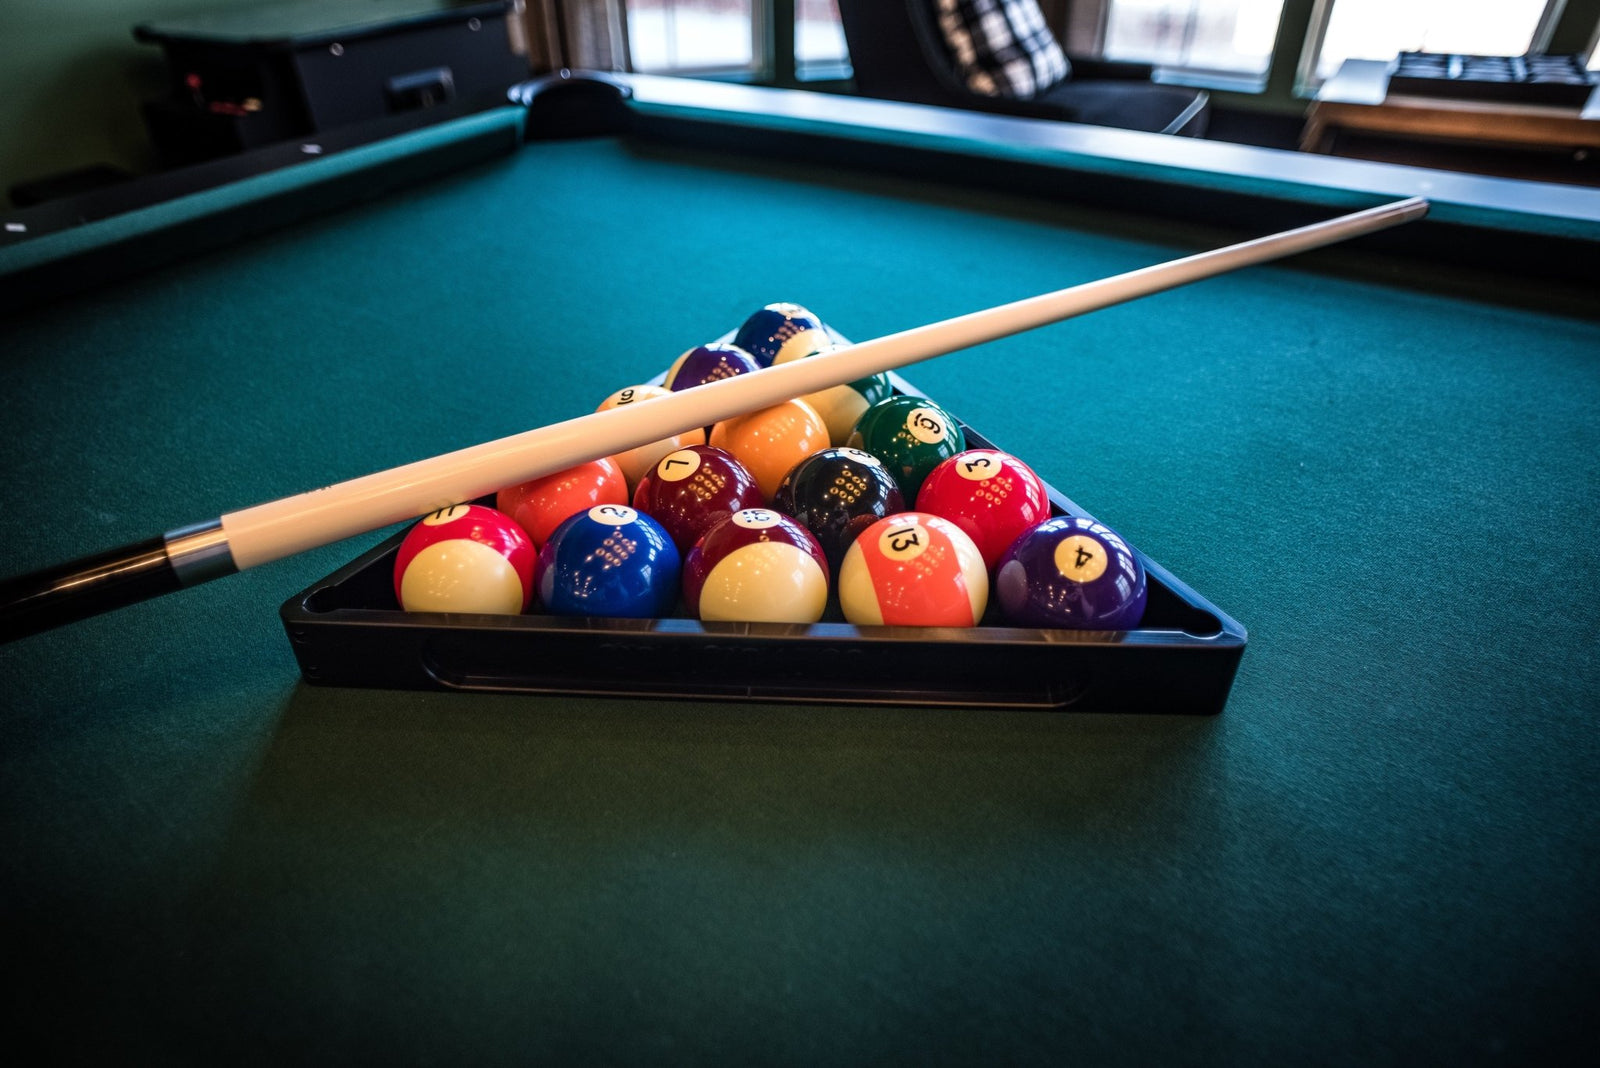 Pool Cue Replacement Shaft: Choosing the Best - Billiard and Pool Center